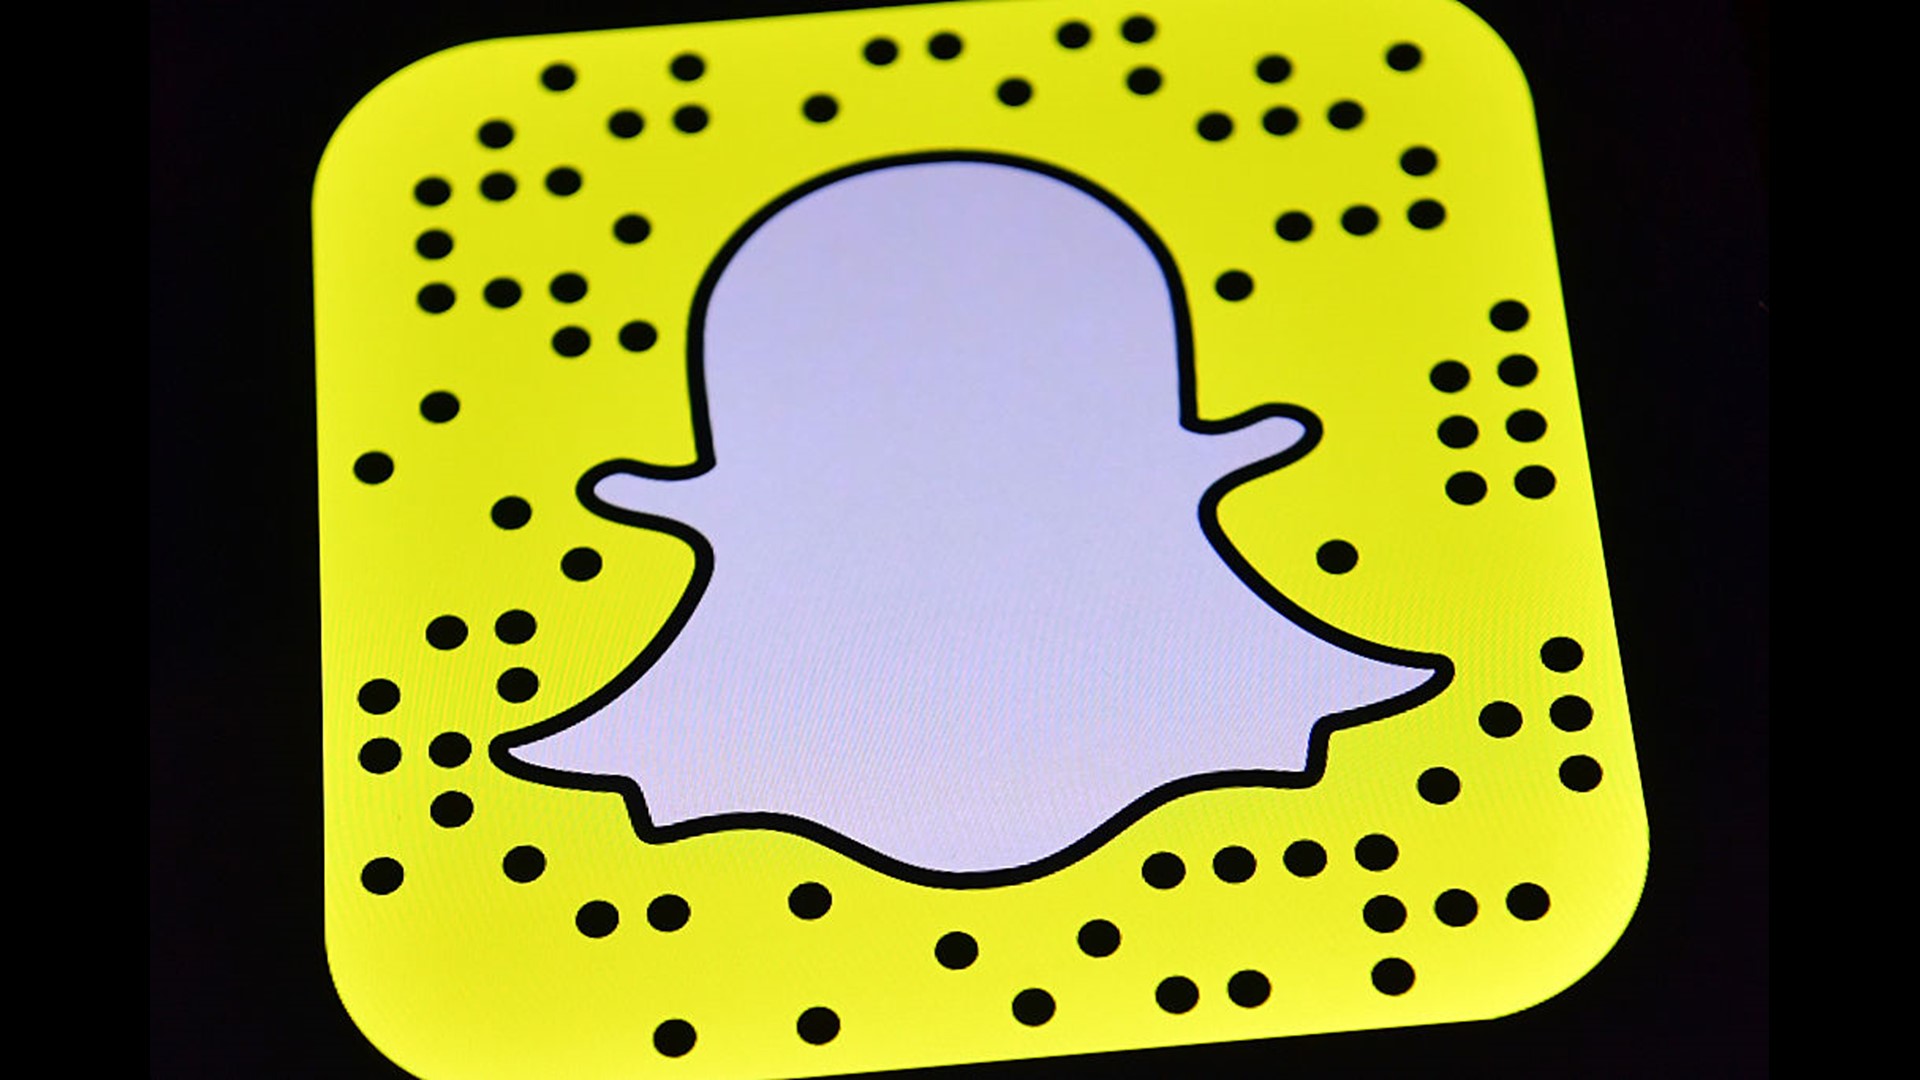 According to one group, finding porn on the social media site Snapchat is "too easy."